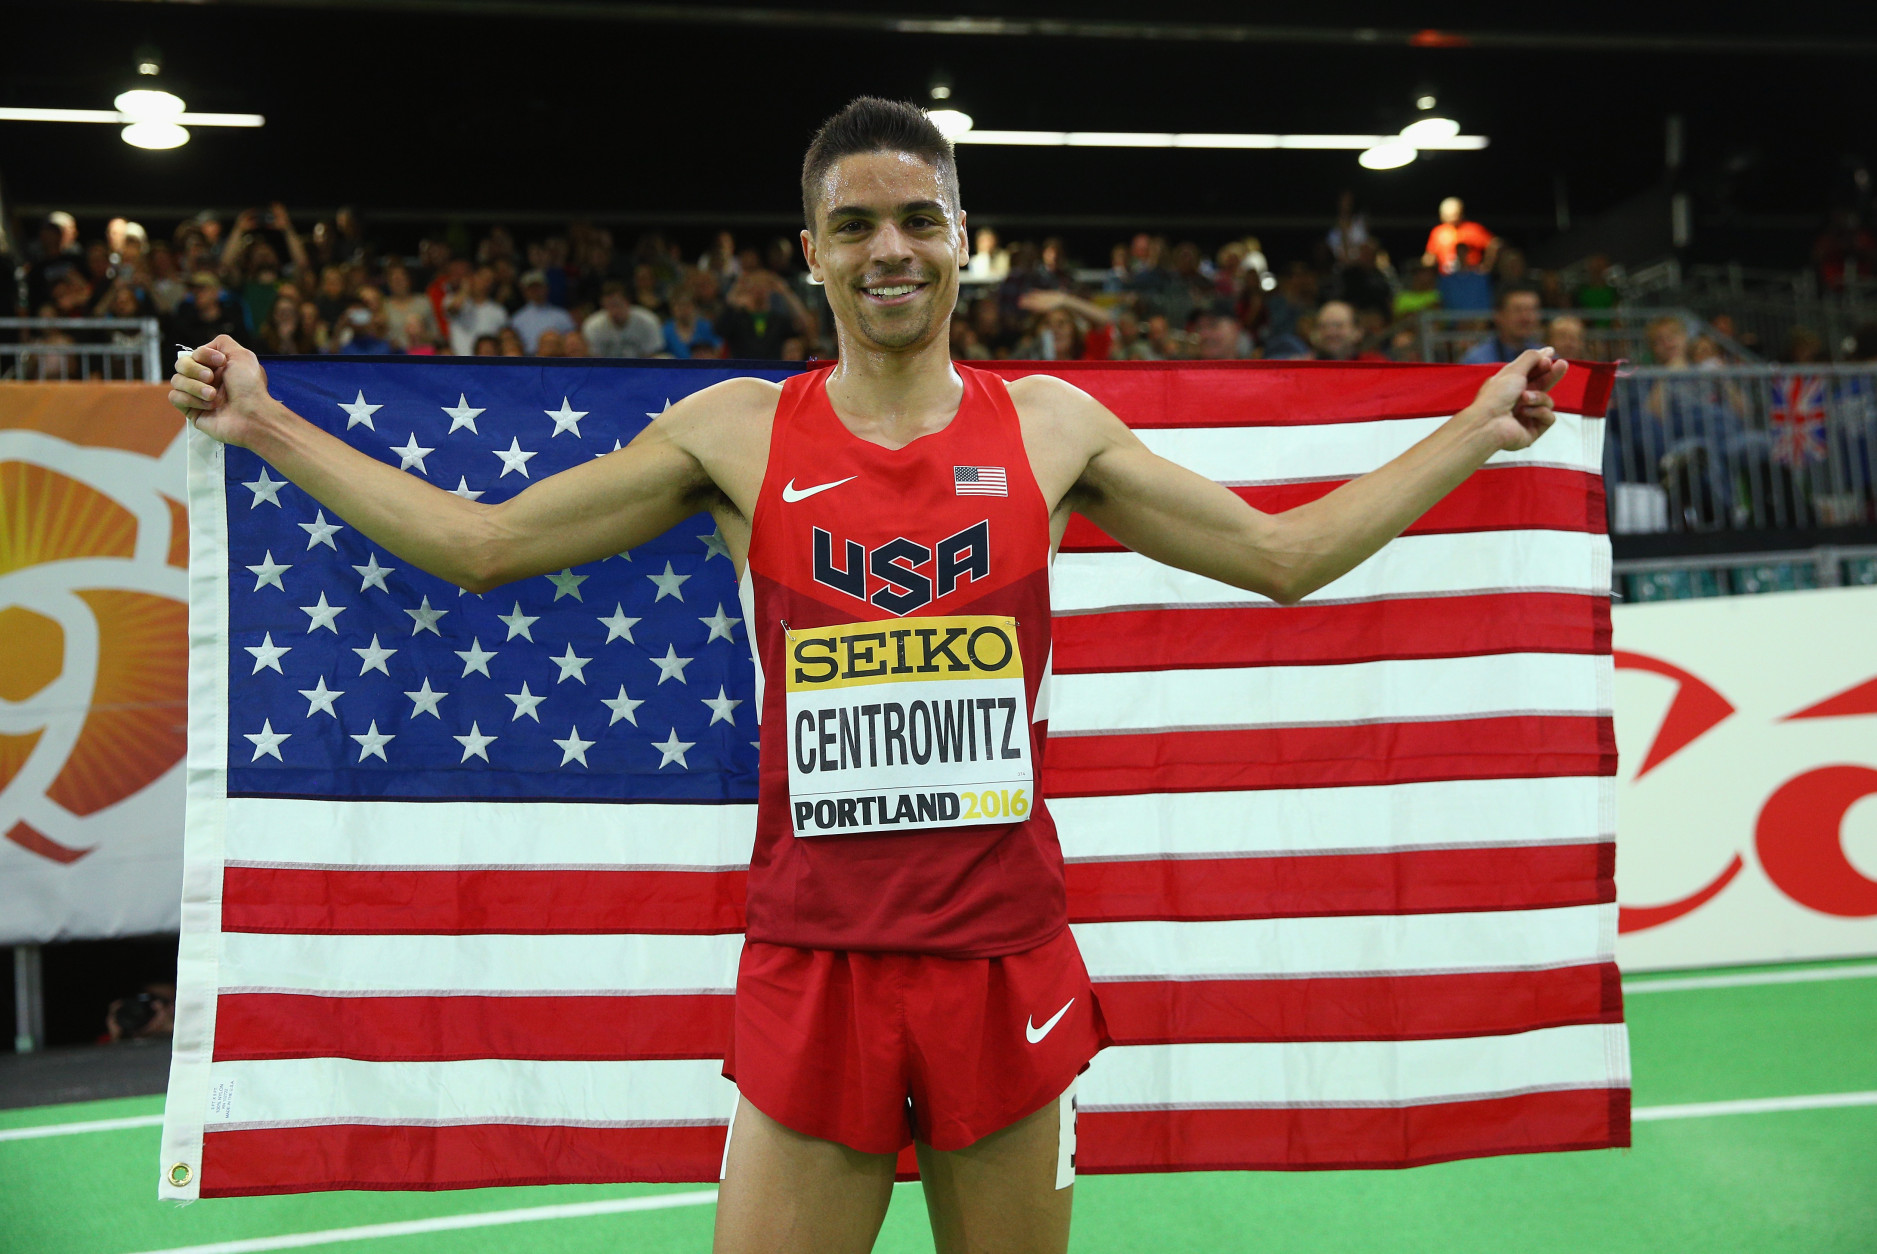 PORTLAND, OR - MARCH 20:  Matthew Centrowitz of the United States wins gold in the Men's 1500 Metres Final during day four of the IAAF World Indoor Championships at Oregon Convention Center on March 20, 2016 in Portland, Oregon.  (Photo by Ian Walton/Getty Images for IAAF)